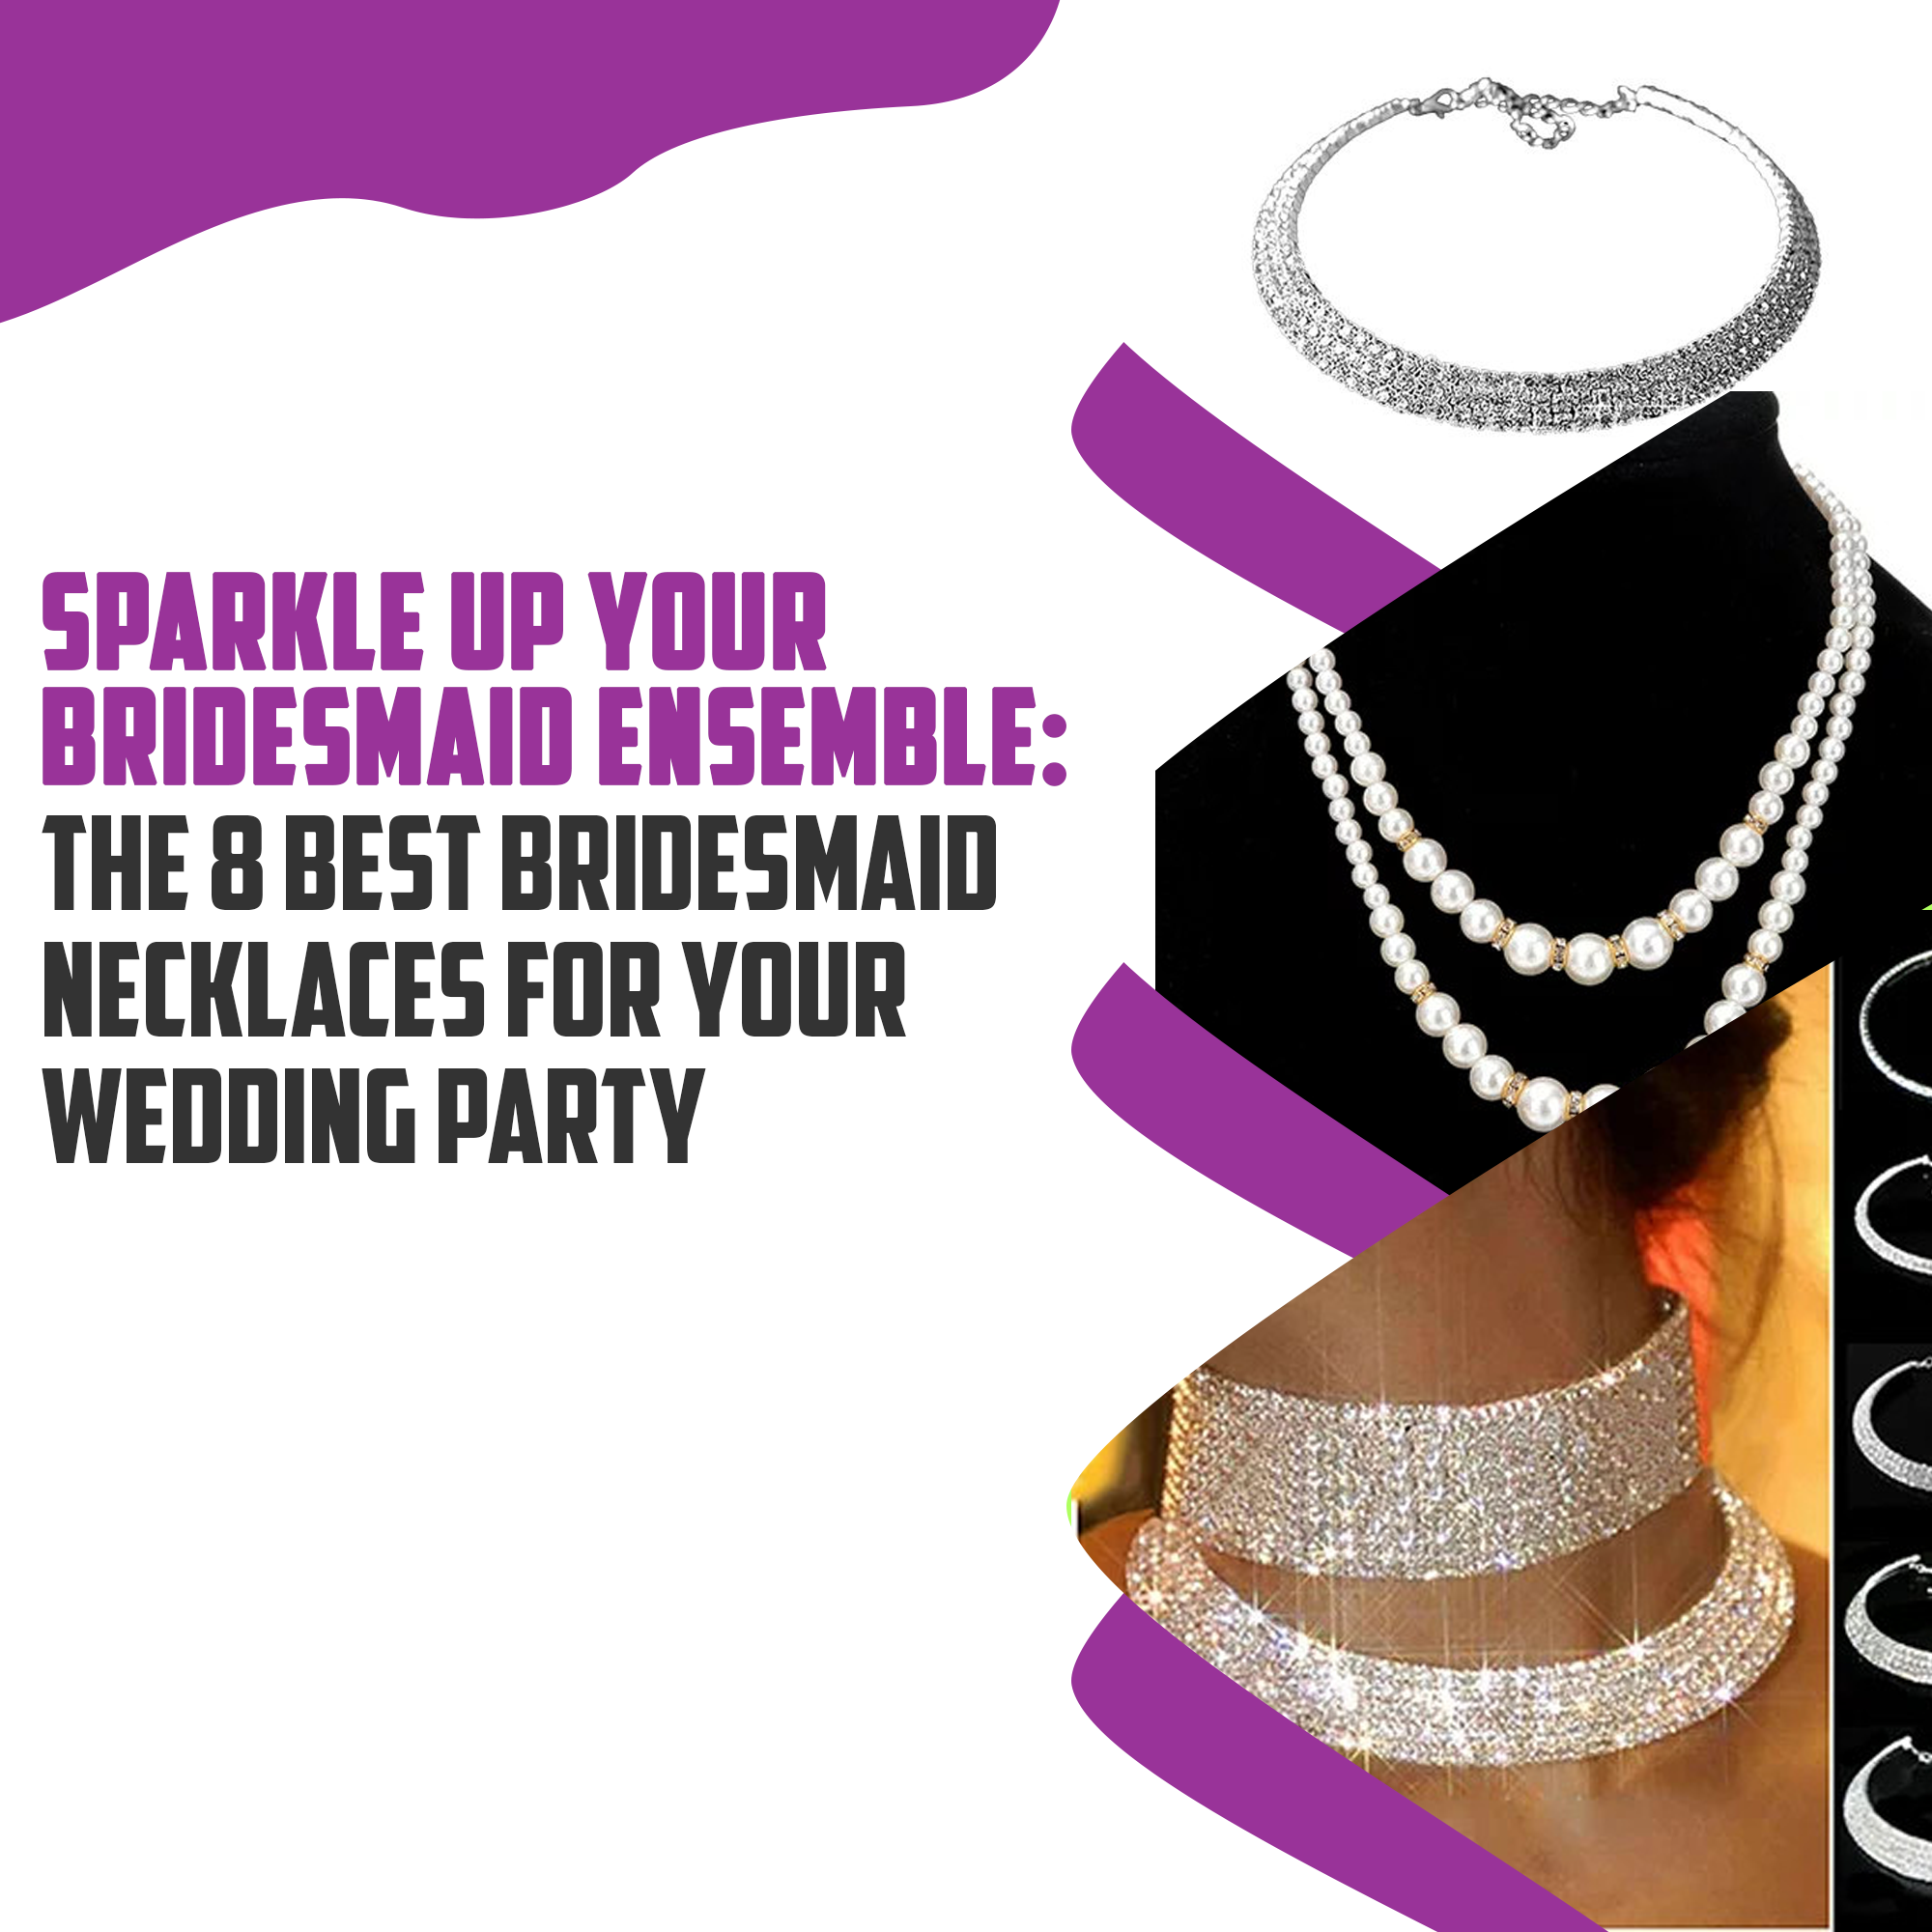 Sparkle Up Your Bridesmaid Ensemble: The 8 Best Bridesmaid Necklaces for Your Wedding Party